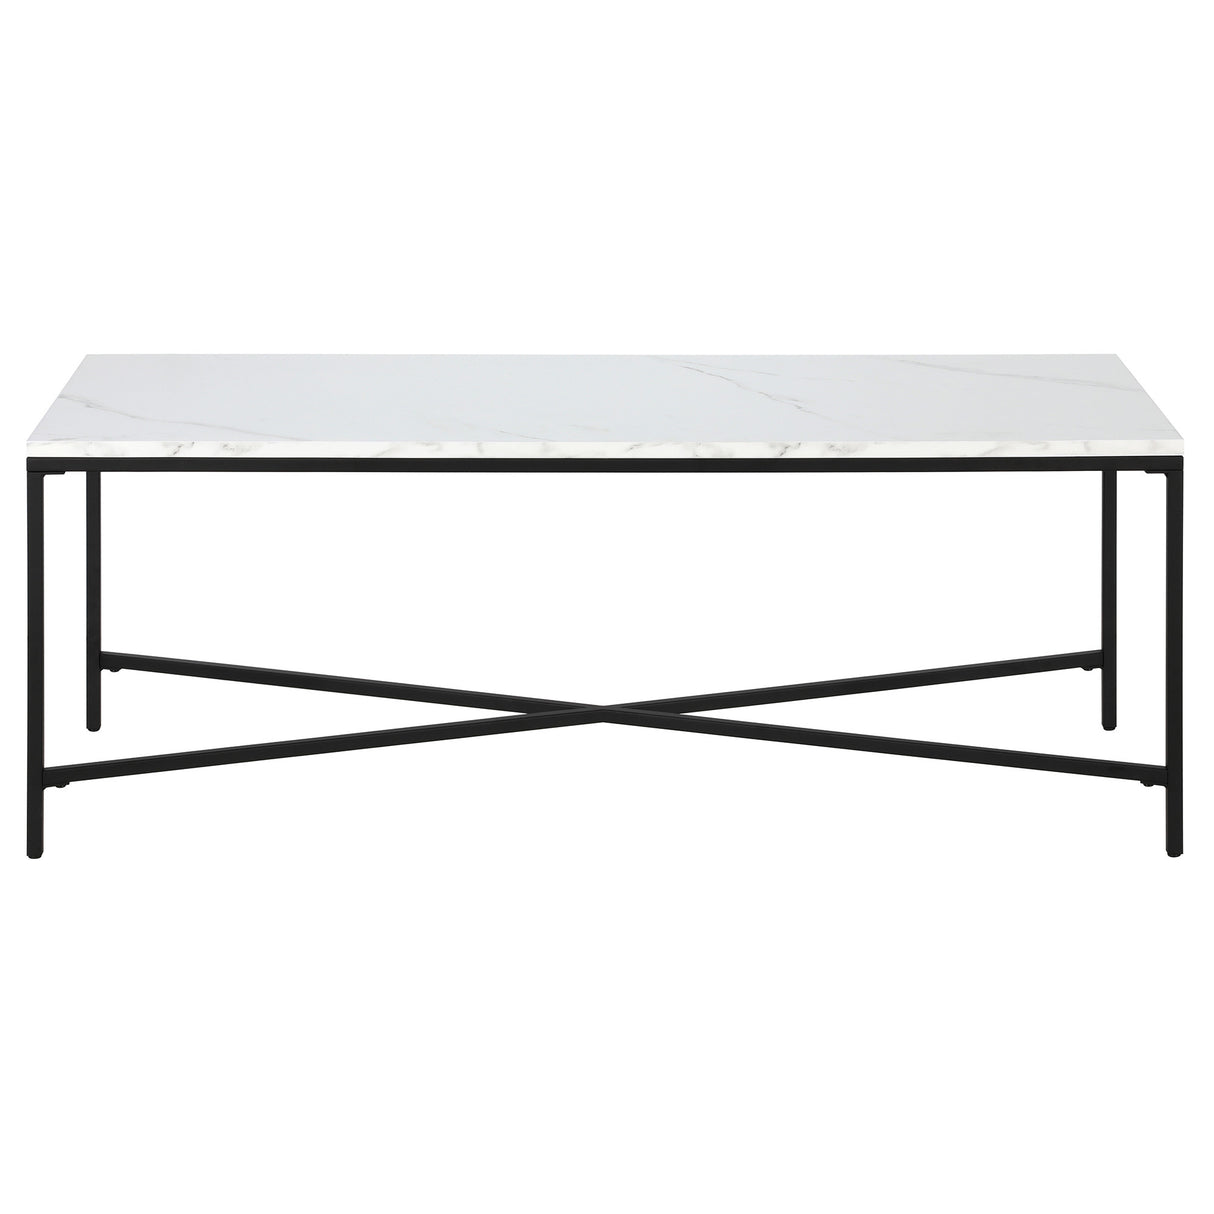 48" White And Black Steel Coffee Table